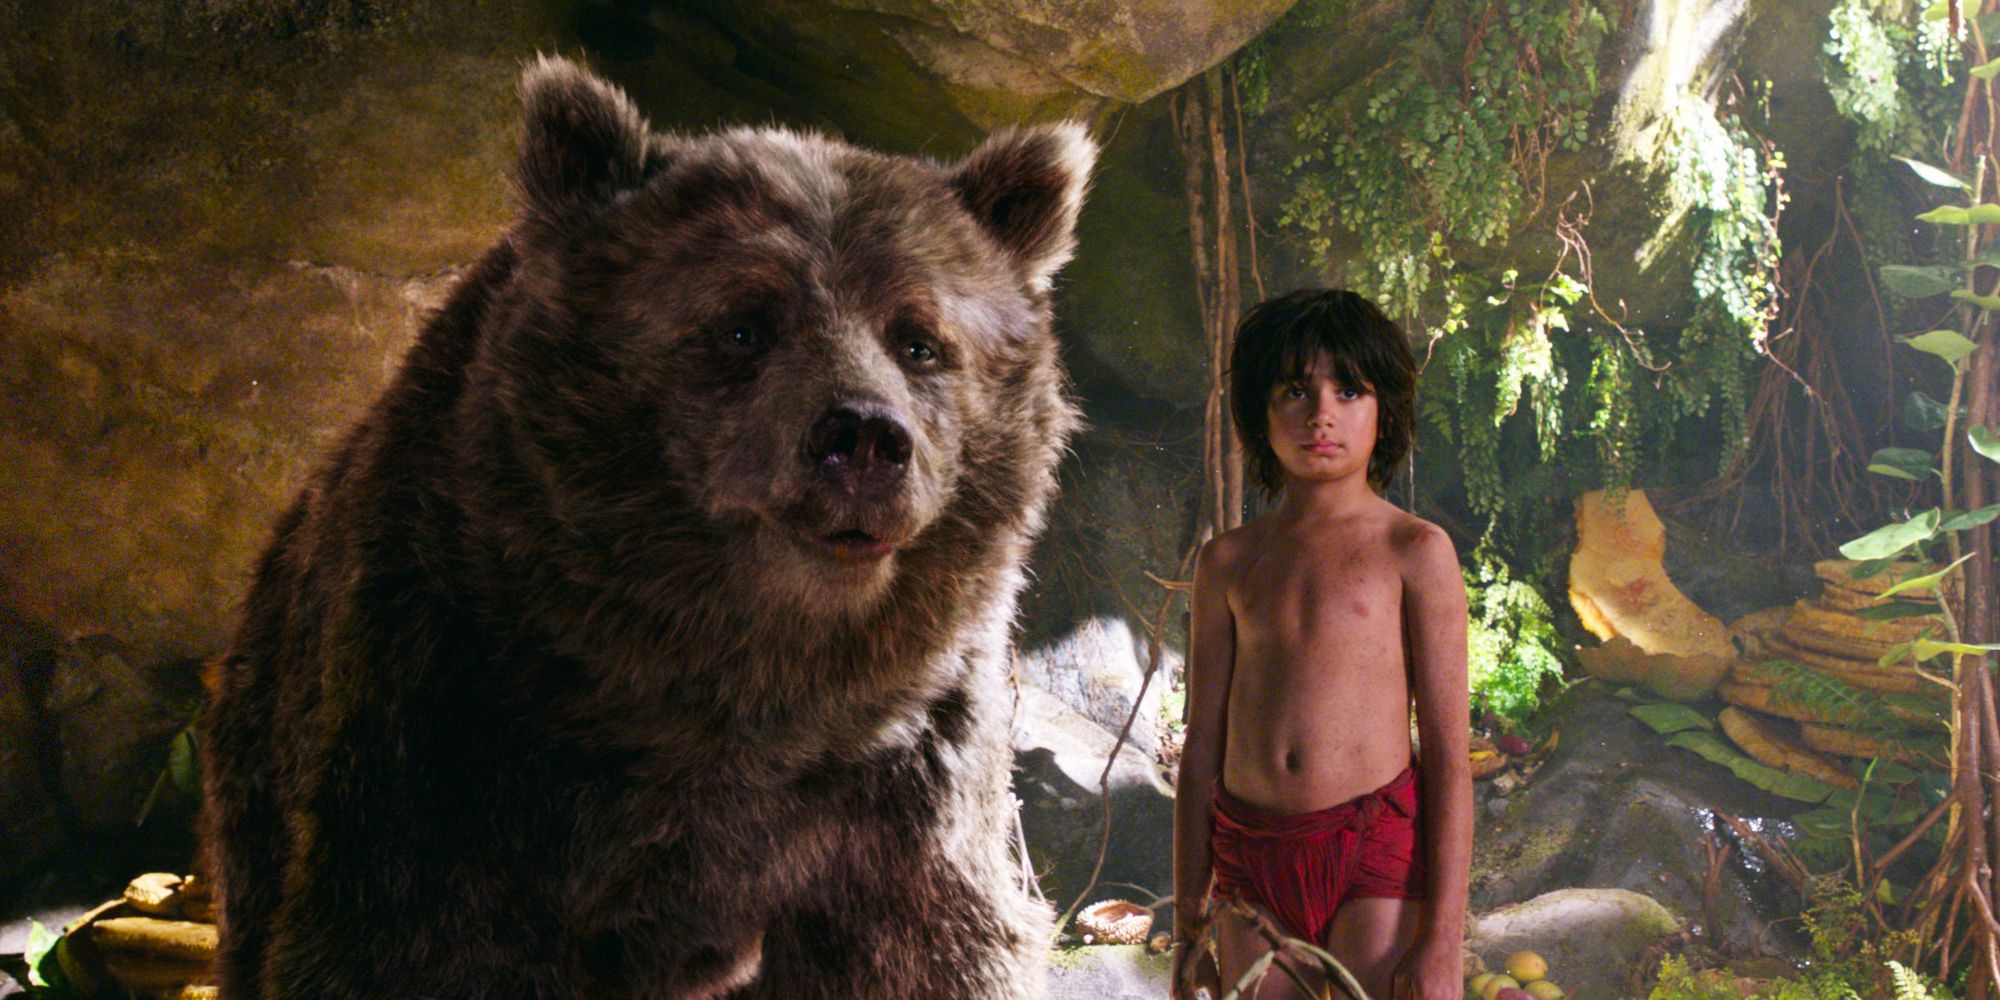 Neel Sethi as Mogli standing next to a bear in The Jungle Book.